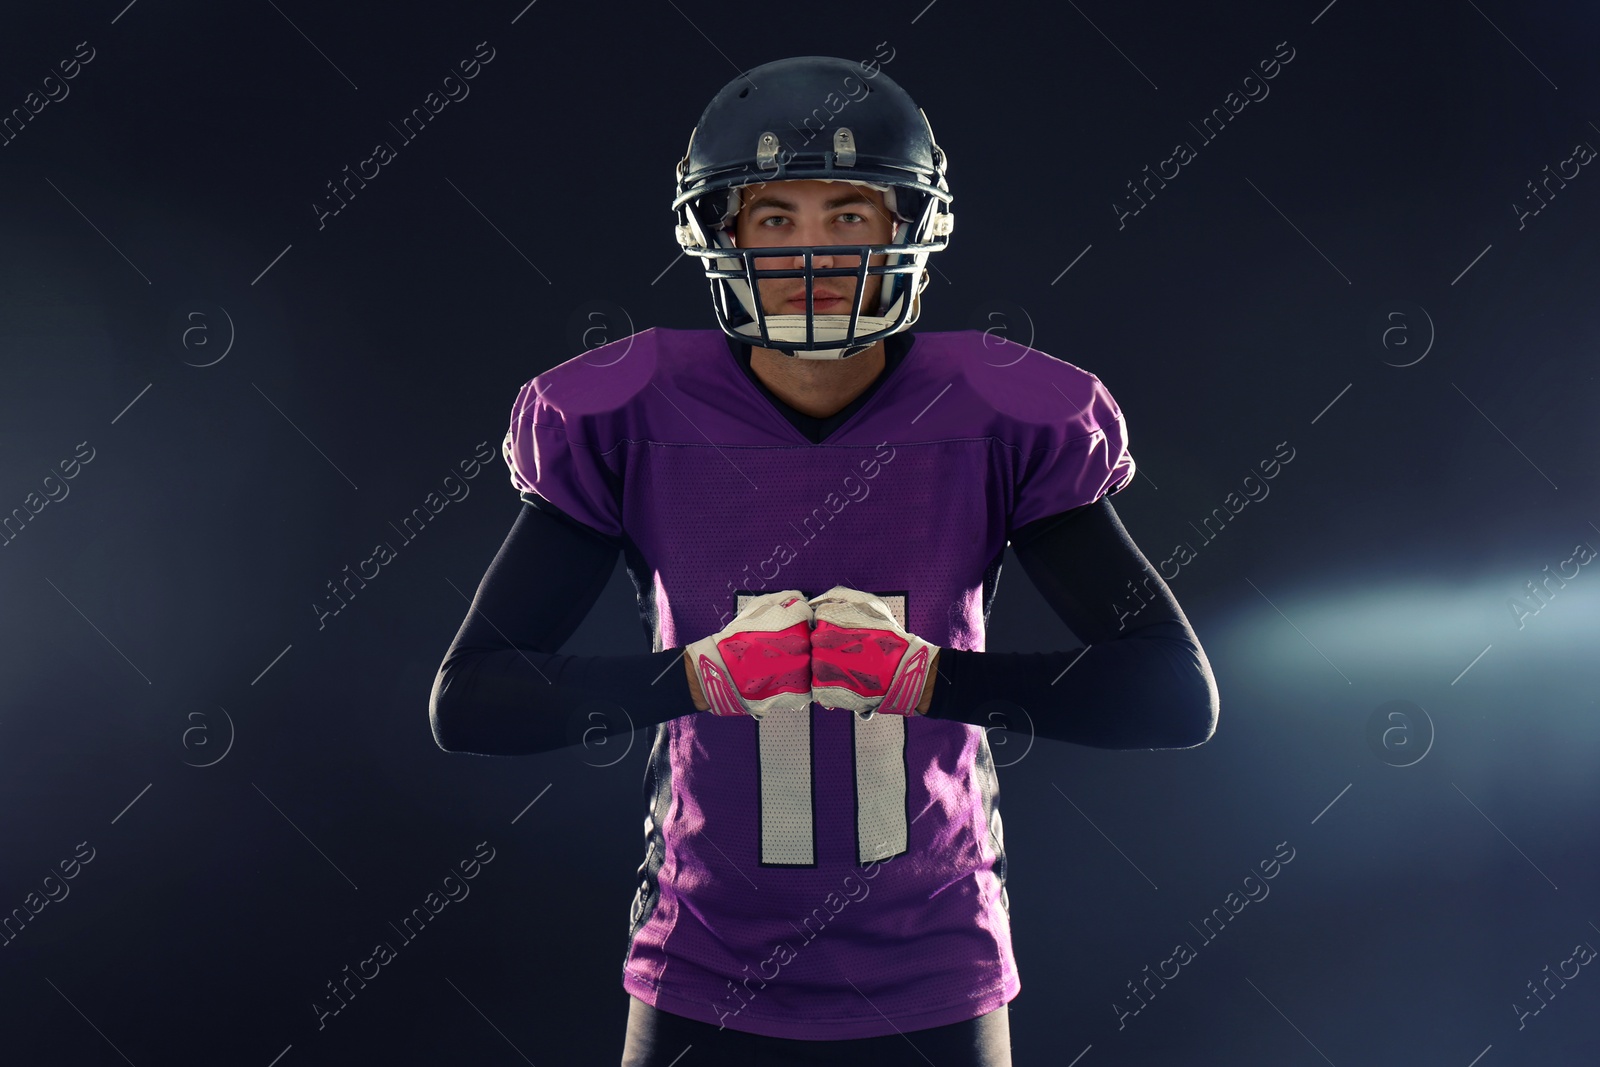 Photo of American football player in uniform on dark background